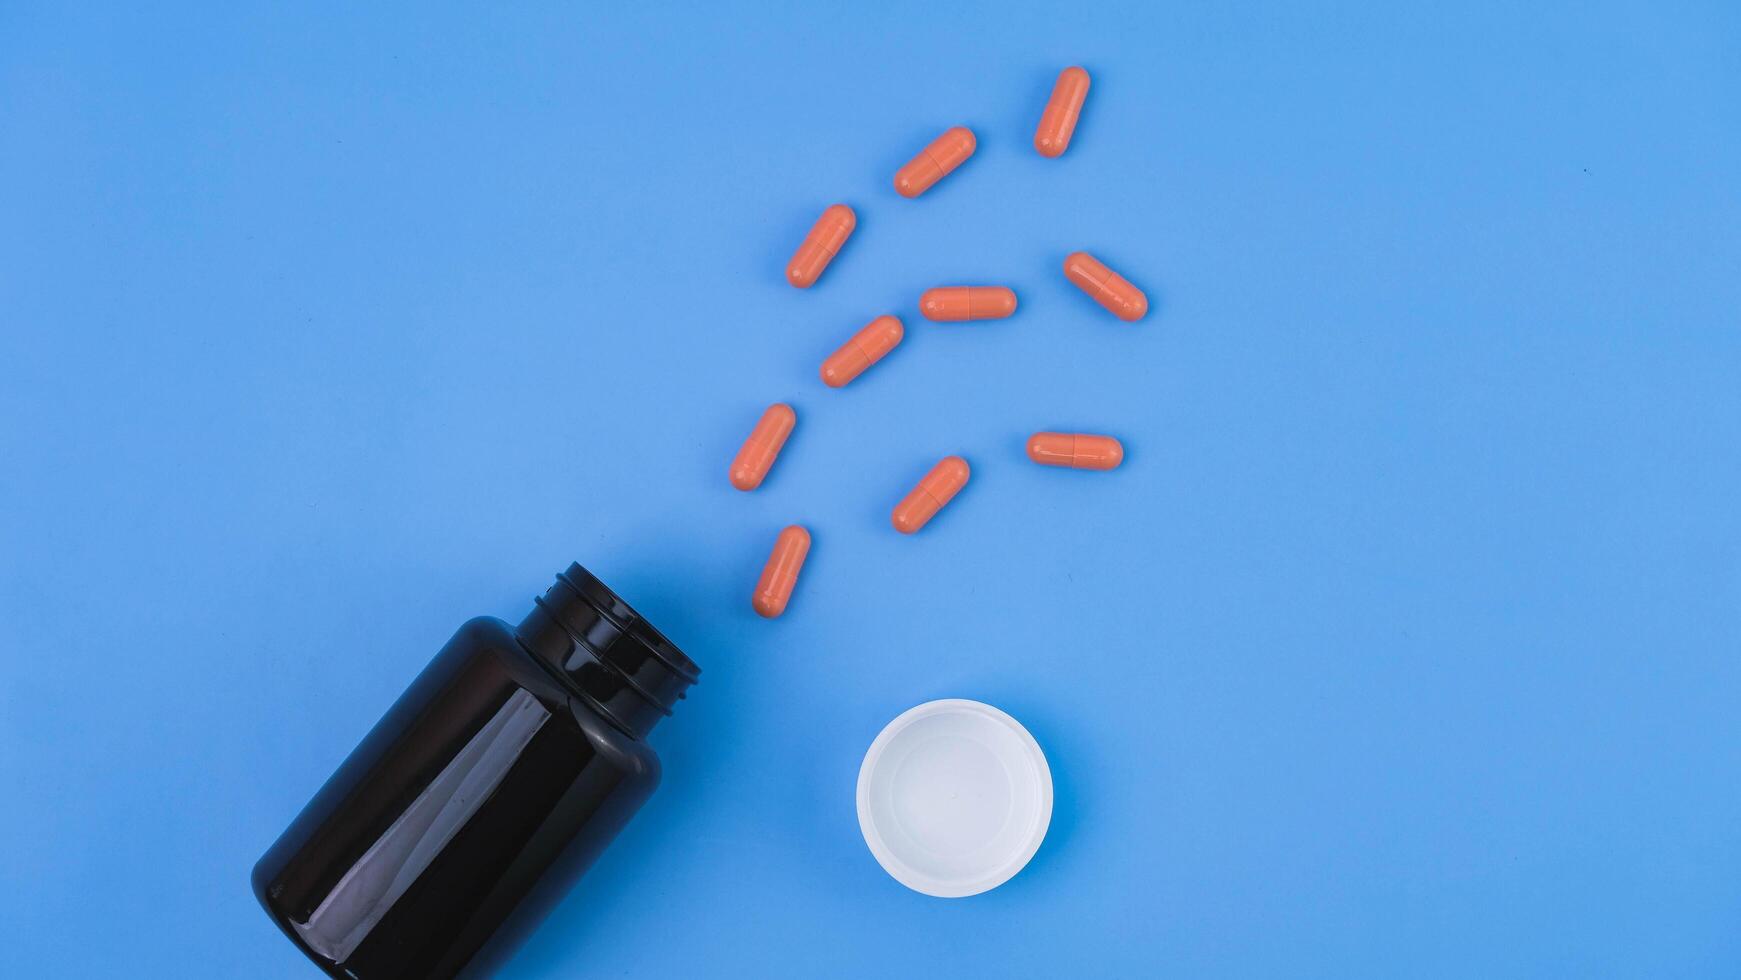 Pill capsule pouring from pharmacy bottle on blue background. Health care concept. photo